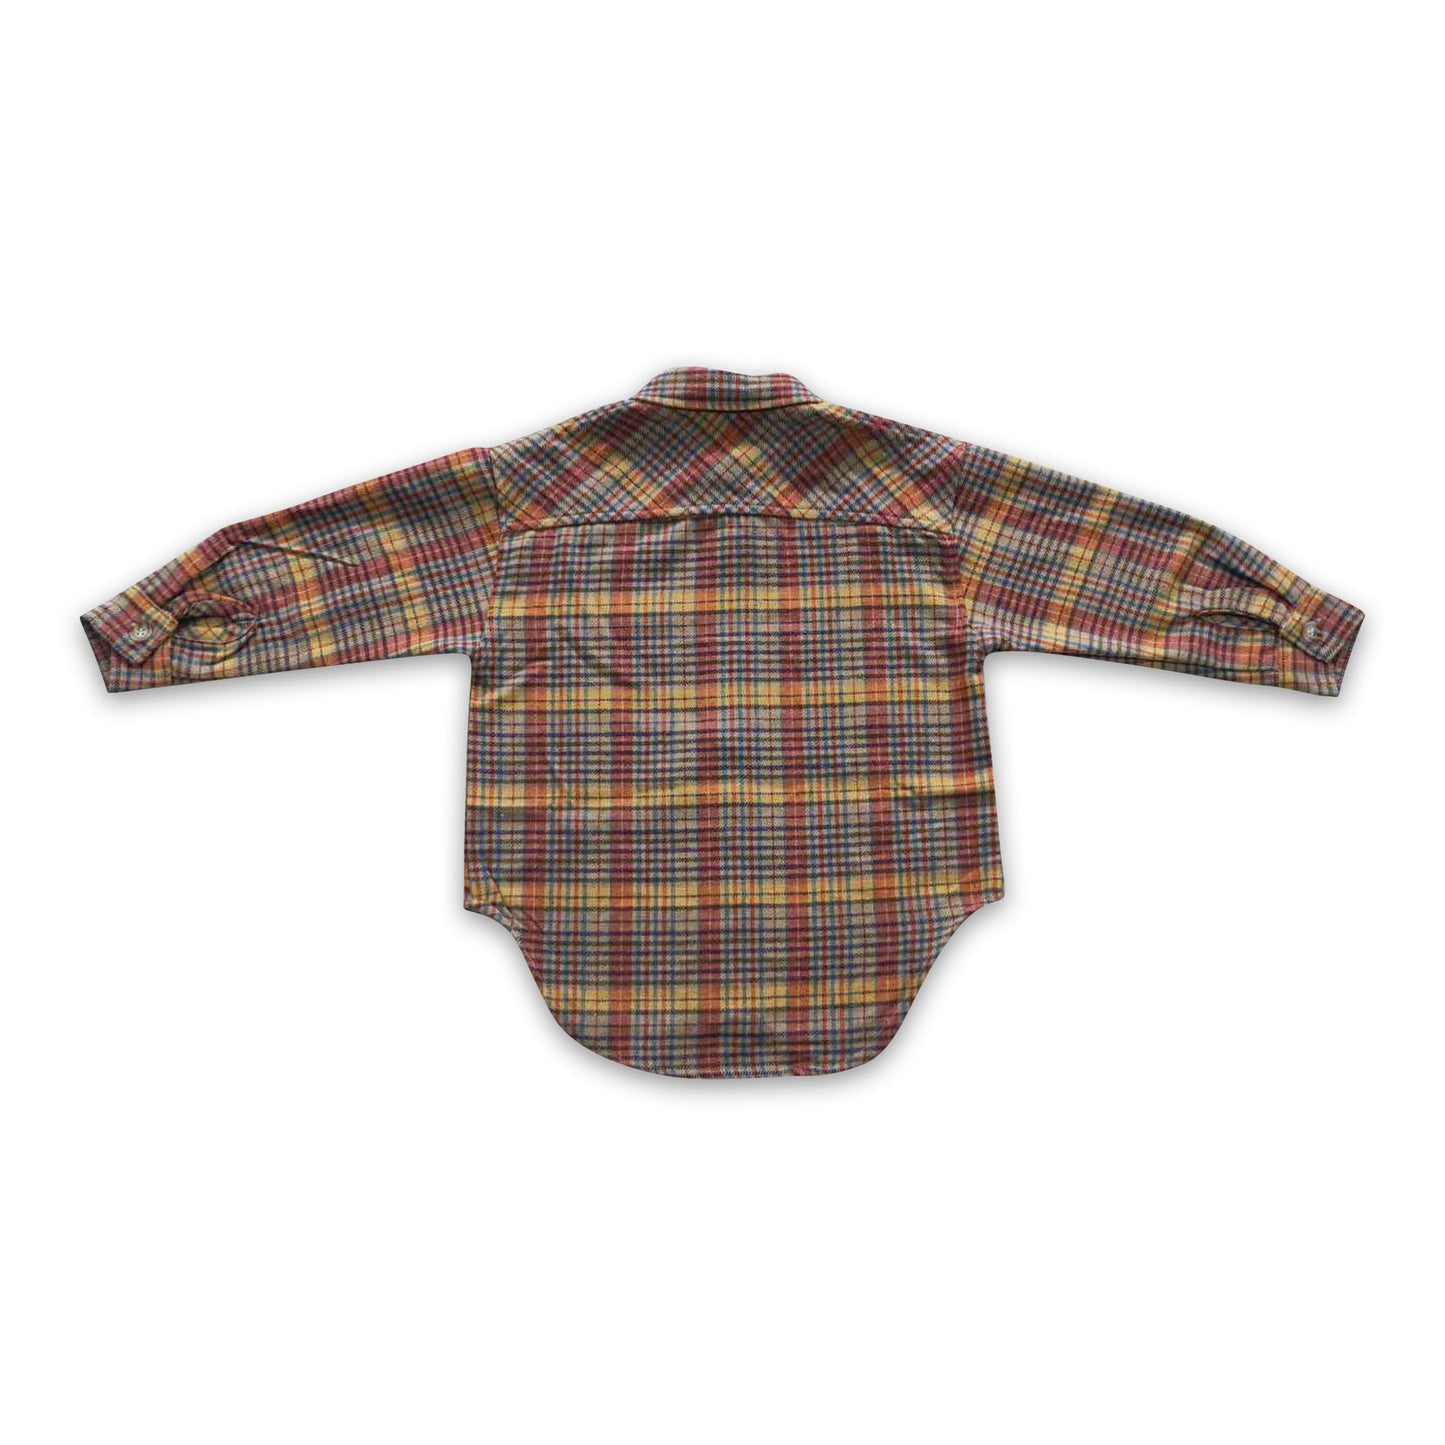 Plaid long sleeves fall kids boy button up flannel